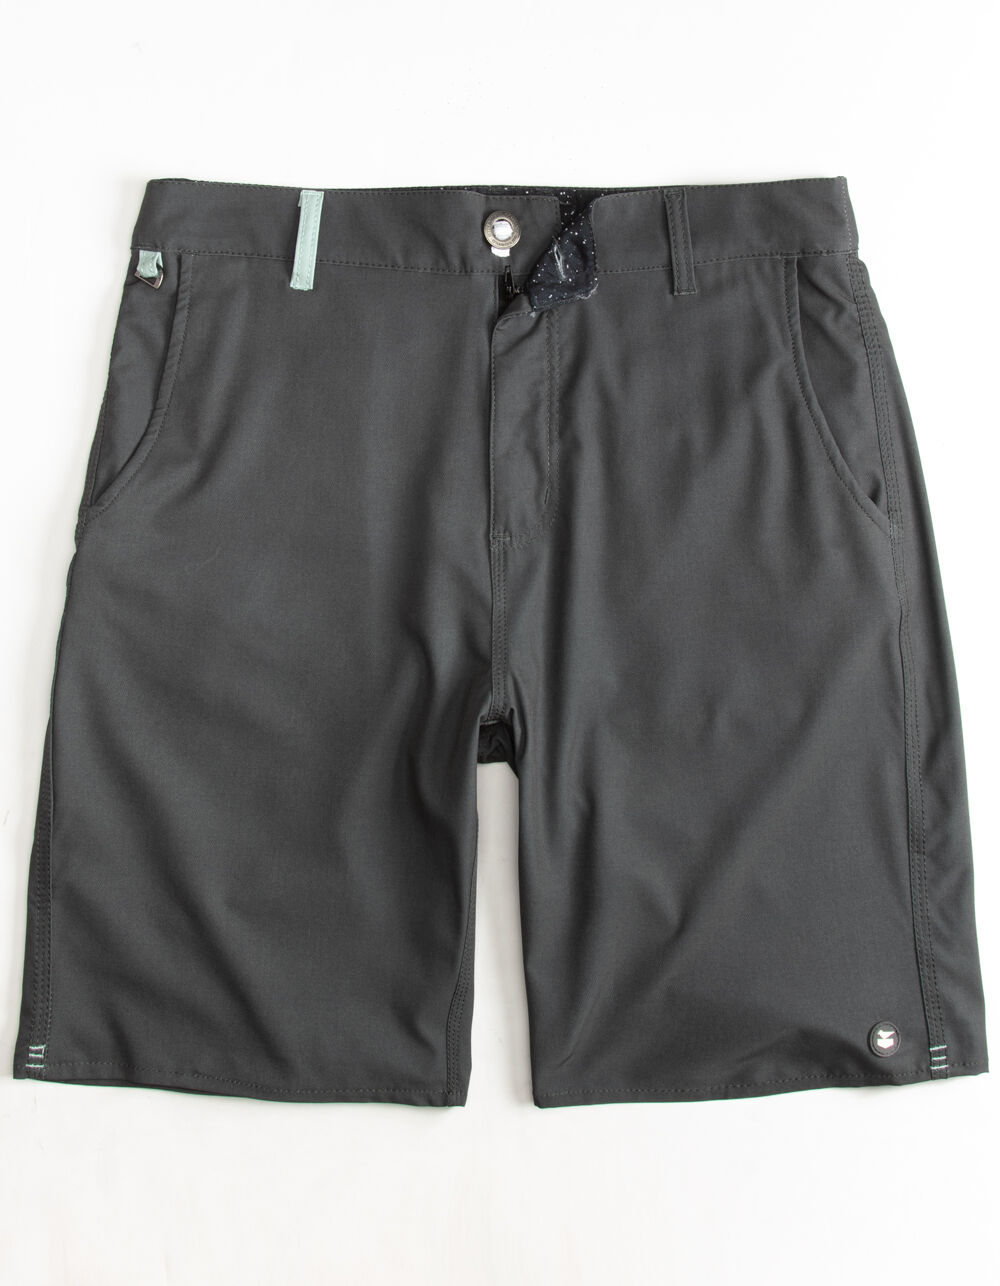 JETTY Polywog Mens Charcoal Hybrid Shorts - CHARCOAL | Tillys